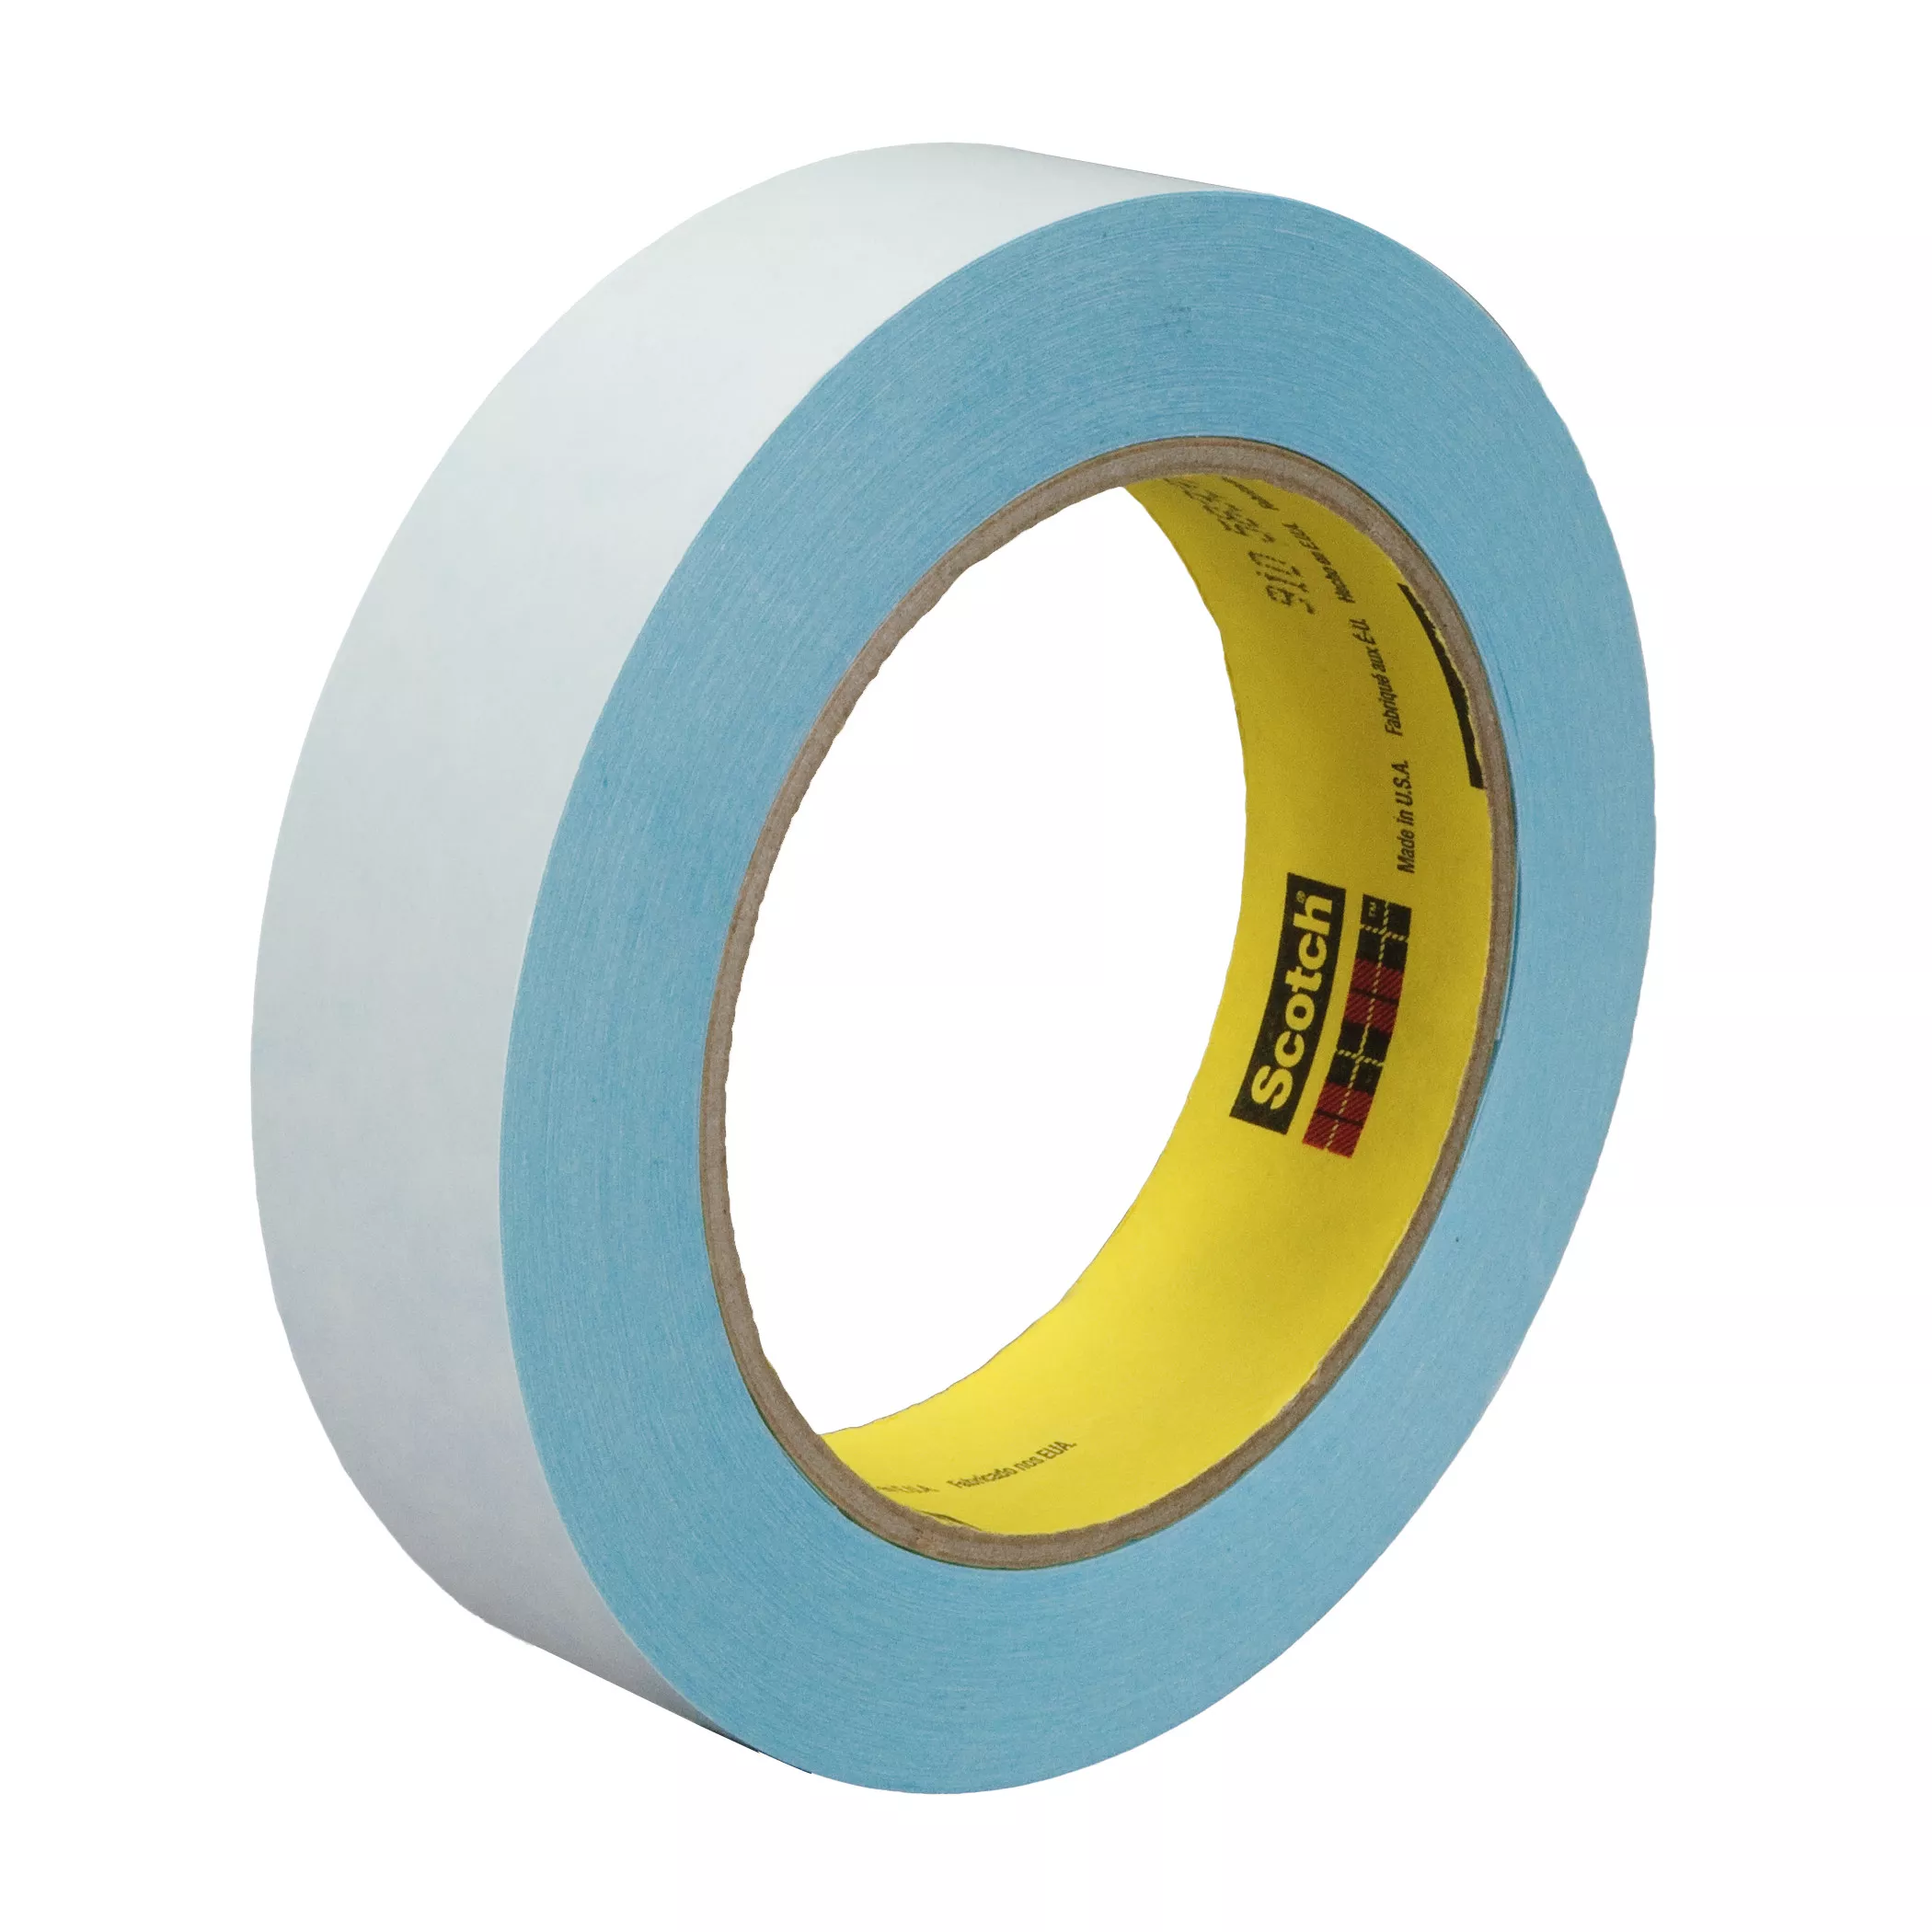 3M™ Repulpable Single Coated Splicing Tape 910, Blue, 24 mm x 55 m, 3.7
mil, 36 Roll/Case